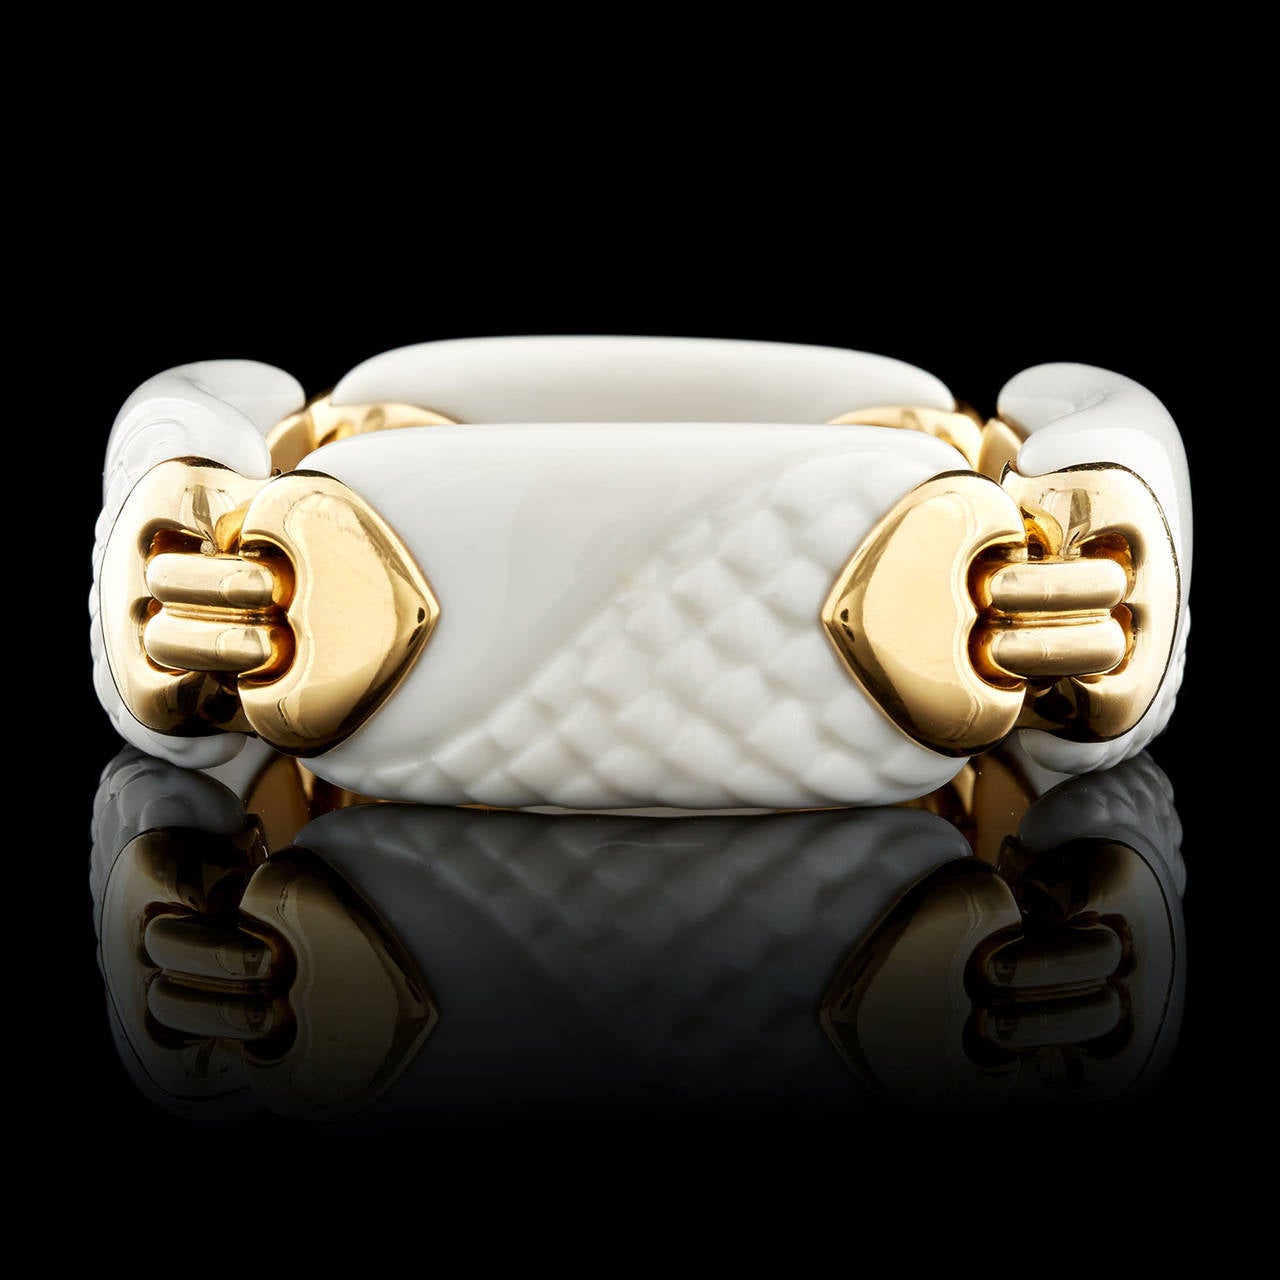 Bulgari Porcelain & 18Kt Yellow Gold Link Bracelet from the Chandra Collection. This bracelet measures 8 inches long and about 1 inch wide. Total weight is 98.1 grams.